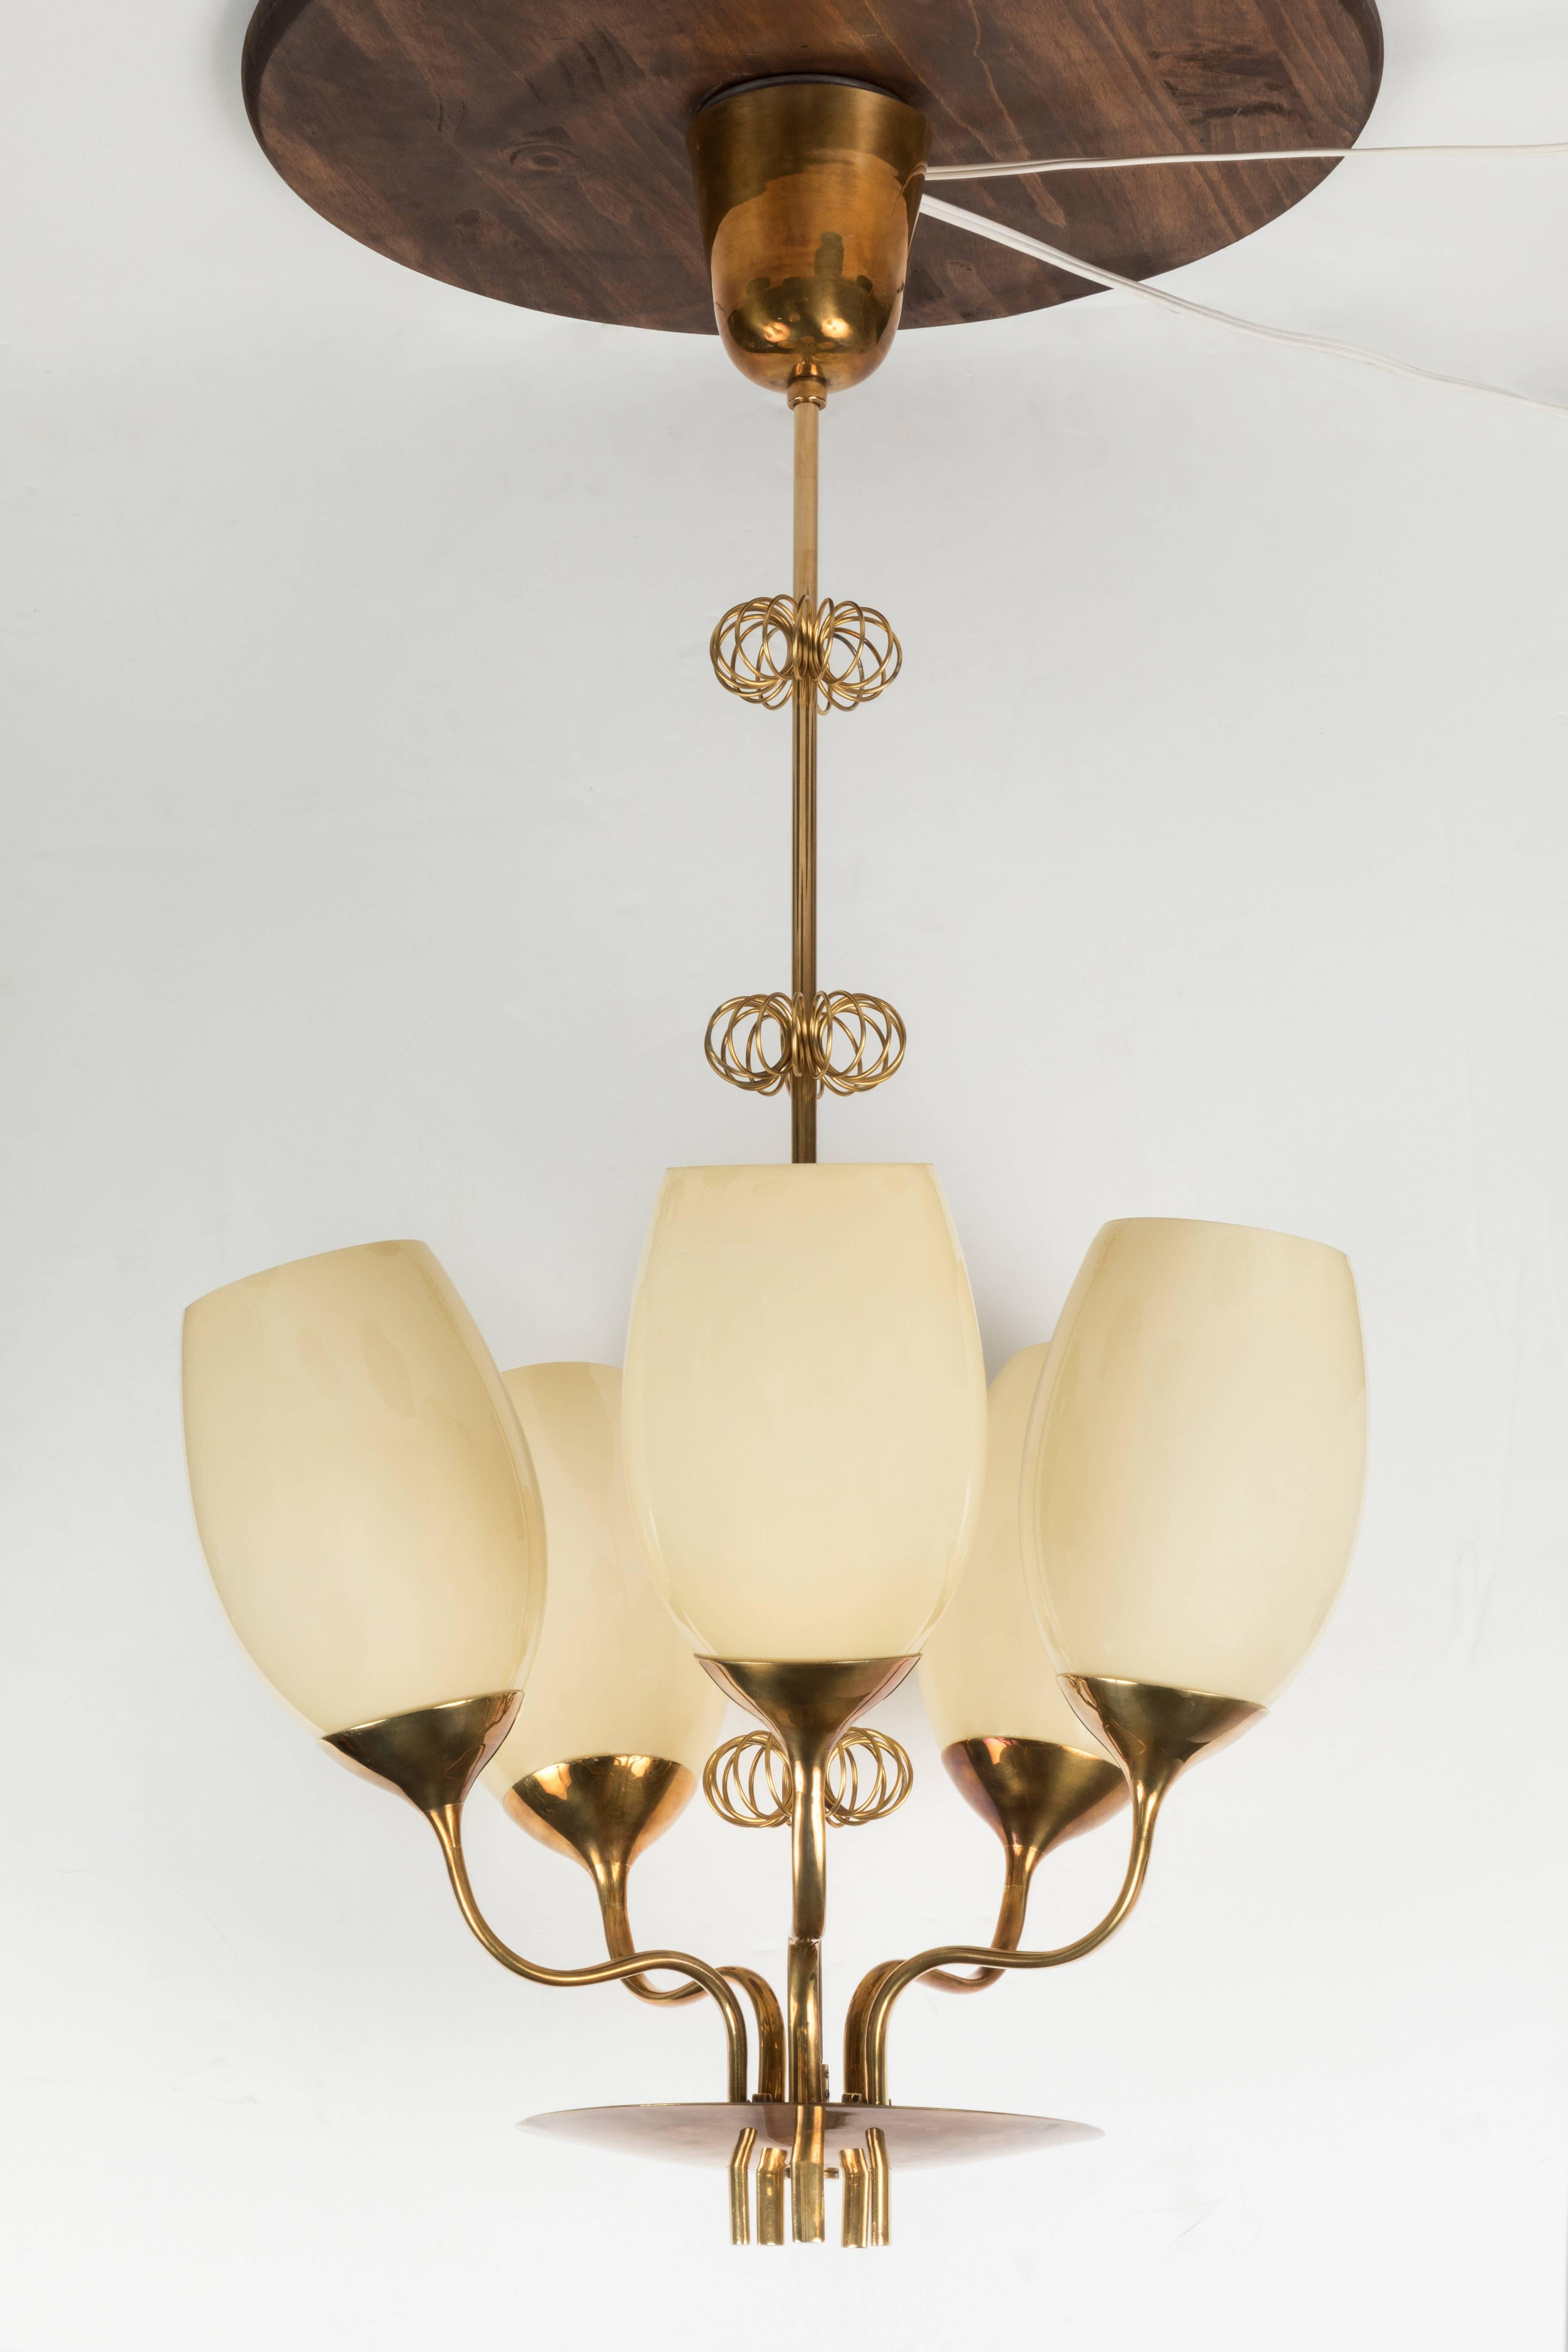 1950s Paavo Tynell Model 9029/5 Chandelier for Taito Oy. A rare and unique chandelier originally owned by a doctor from the Kuopio Children's Hospital in Finland. Executed in attractively patinated brass and handblown opaline glass and whimsically